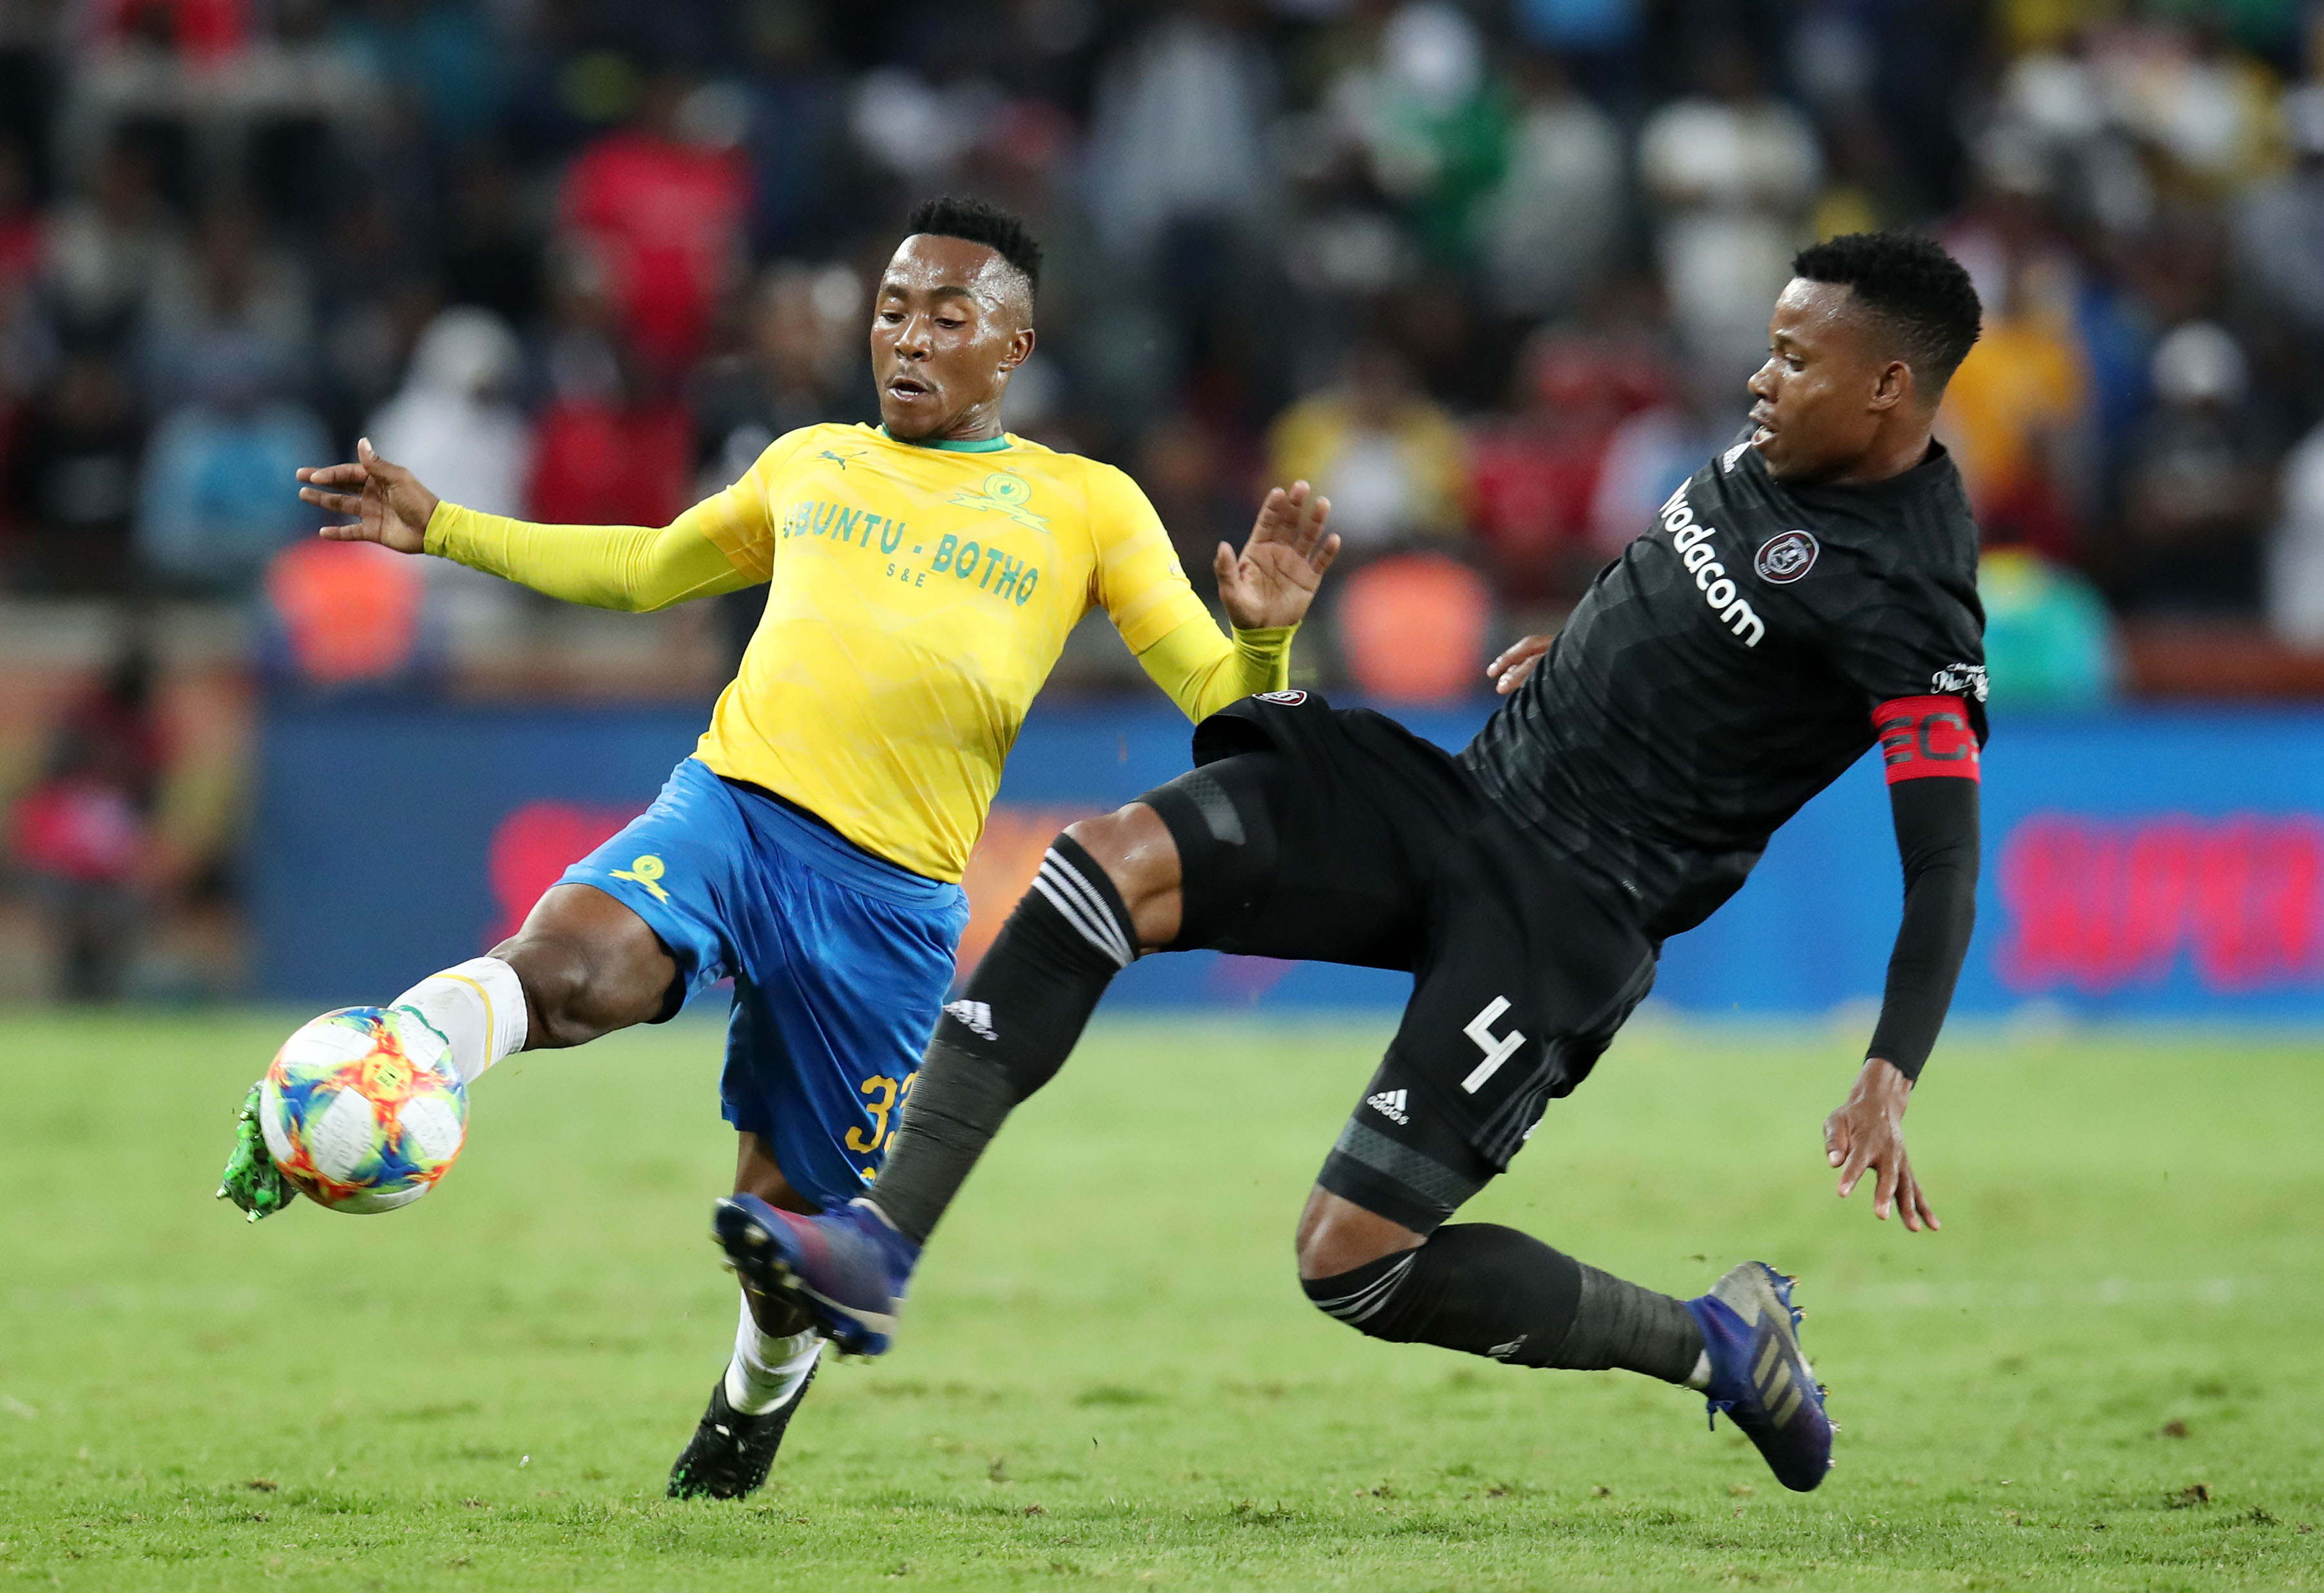 Lebohang Maboe of Mamelodi Sundowns tackled by Happy Jele of Orlando Pirates during the Absa Premiership 2018/19 match between Orlando Pirates and Mamelodi Sundowns at the Orlando Stadium, Soweto on the 01 April 2019.